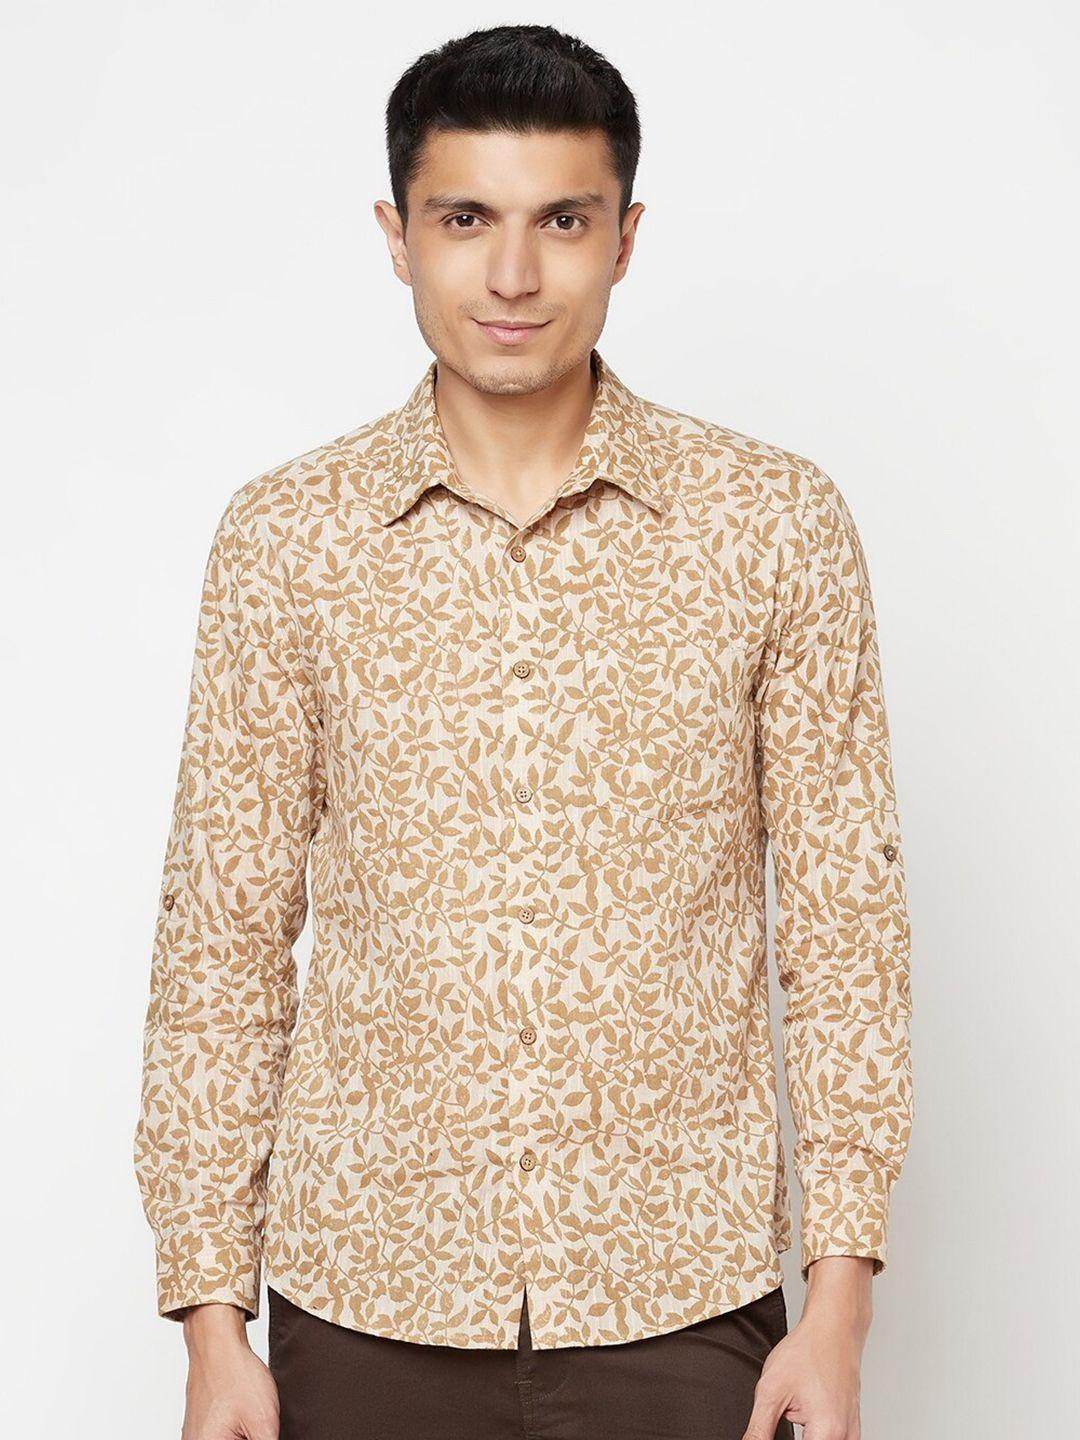 fabindia-men-beige-&-off-white-slim-fit-floral-printed-cotton-casual-shirt